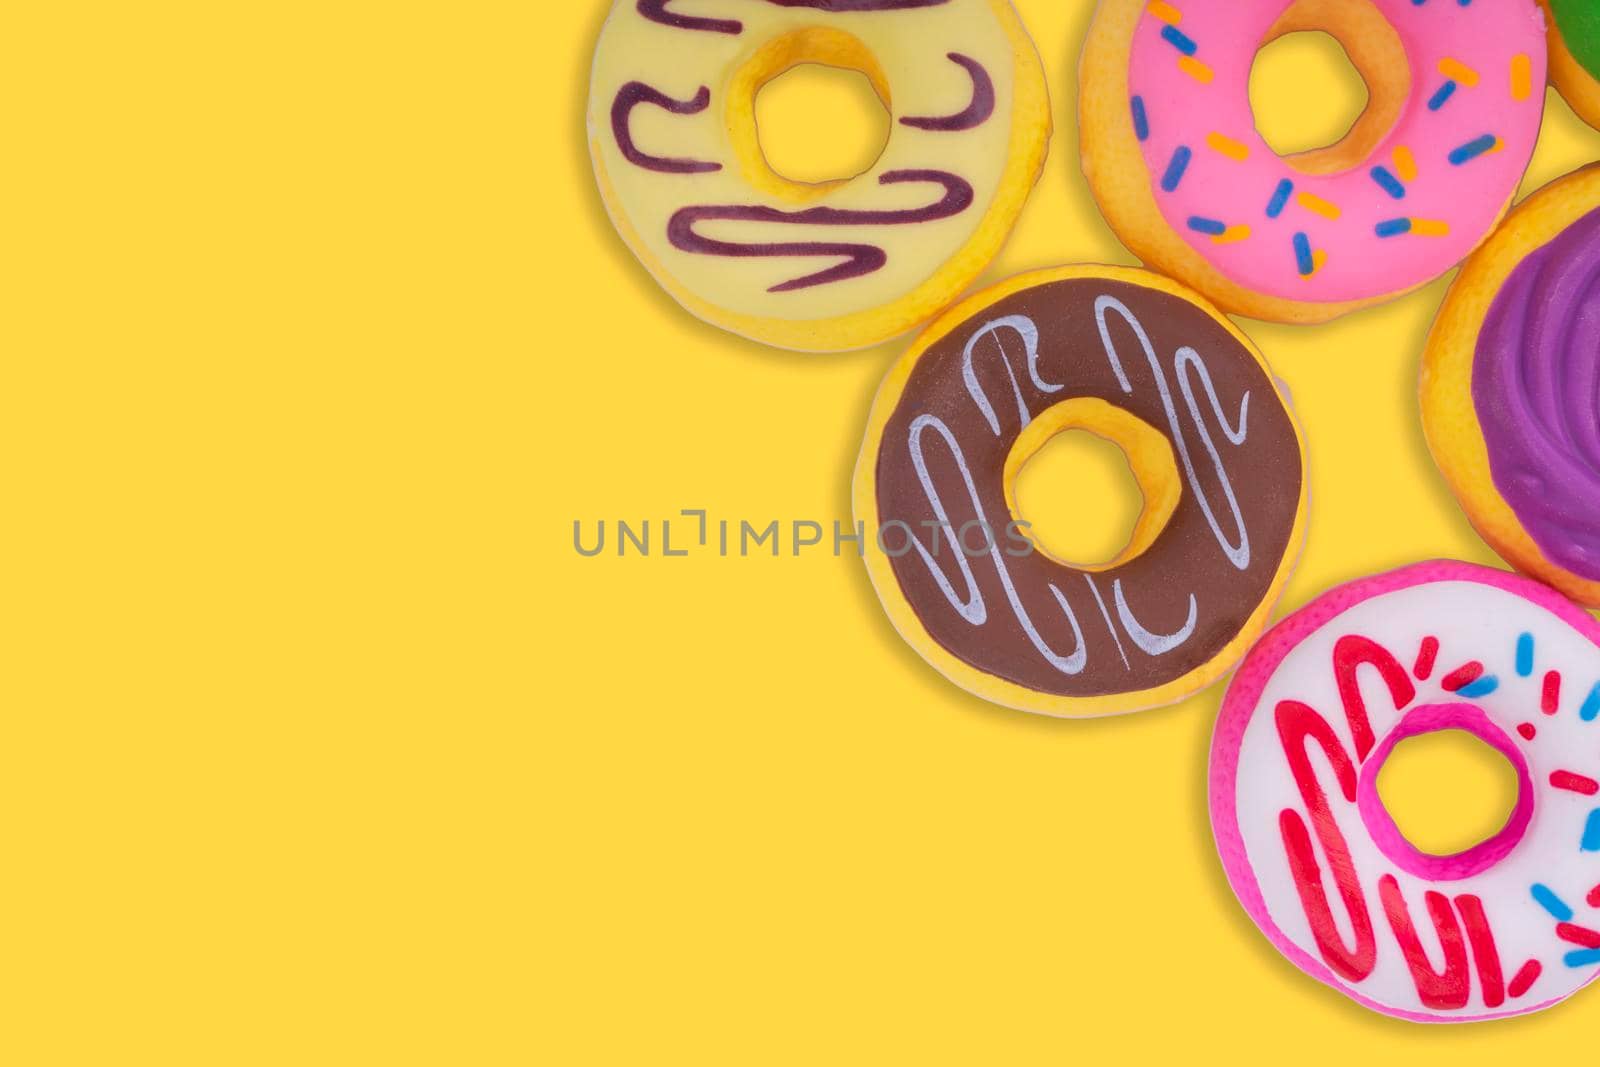 Doughnut or Donut on yellow background. 